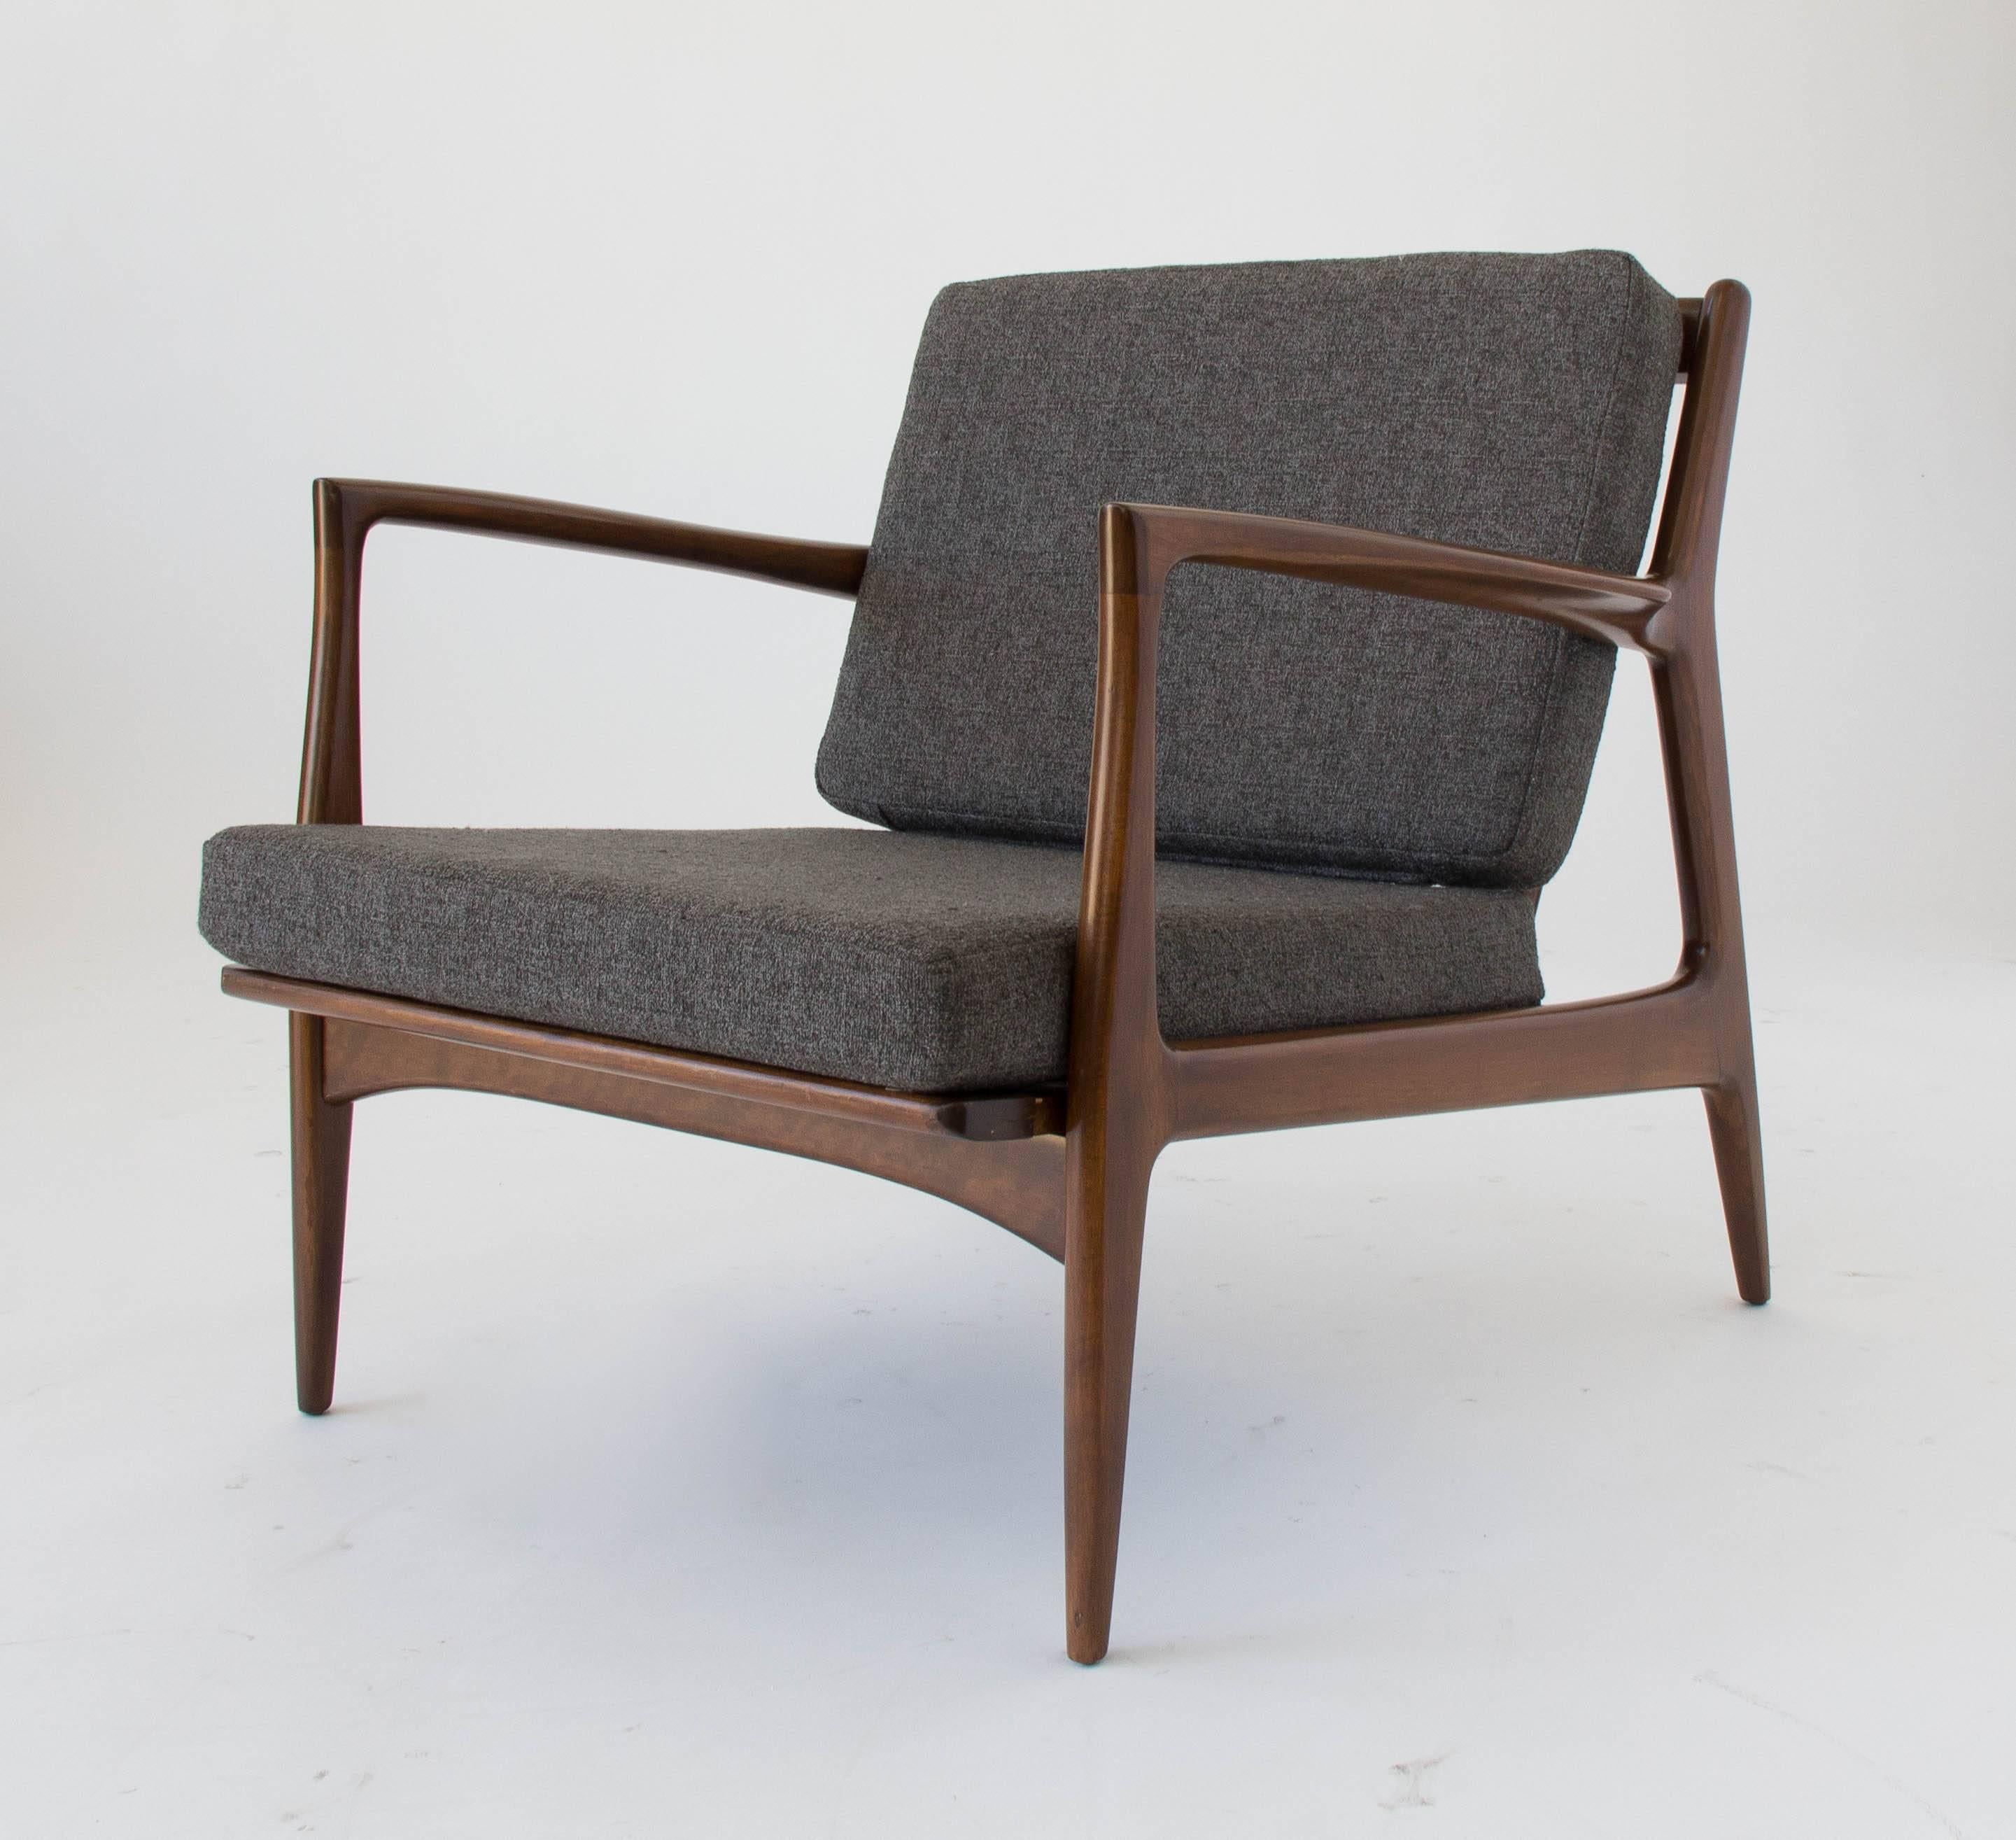 Danish Modern lounge chair in walnut-stained beech designed by Ib Kofod-Larsen for Selig. The chair has slightly curved armrests and a angled frame. The charcoal grey bouclé cushions are supported at by an open-back frame with sculptural spokes. The